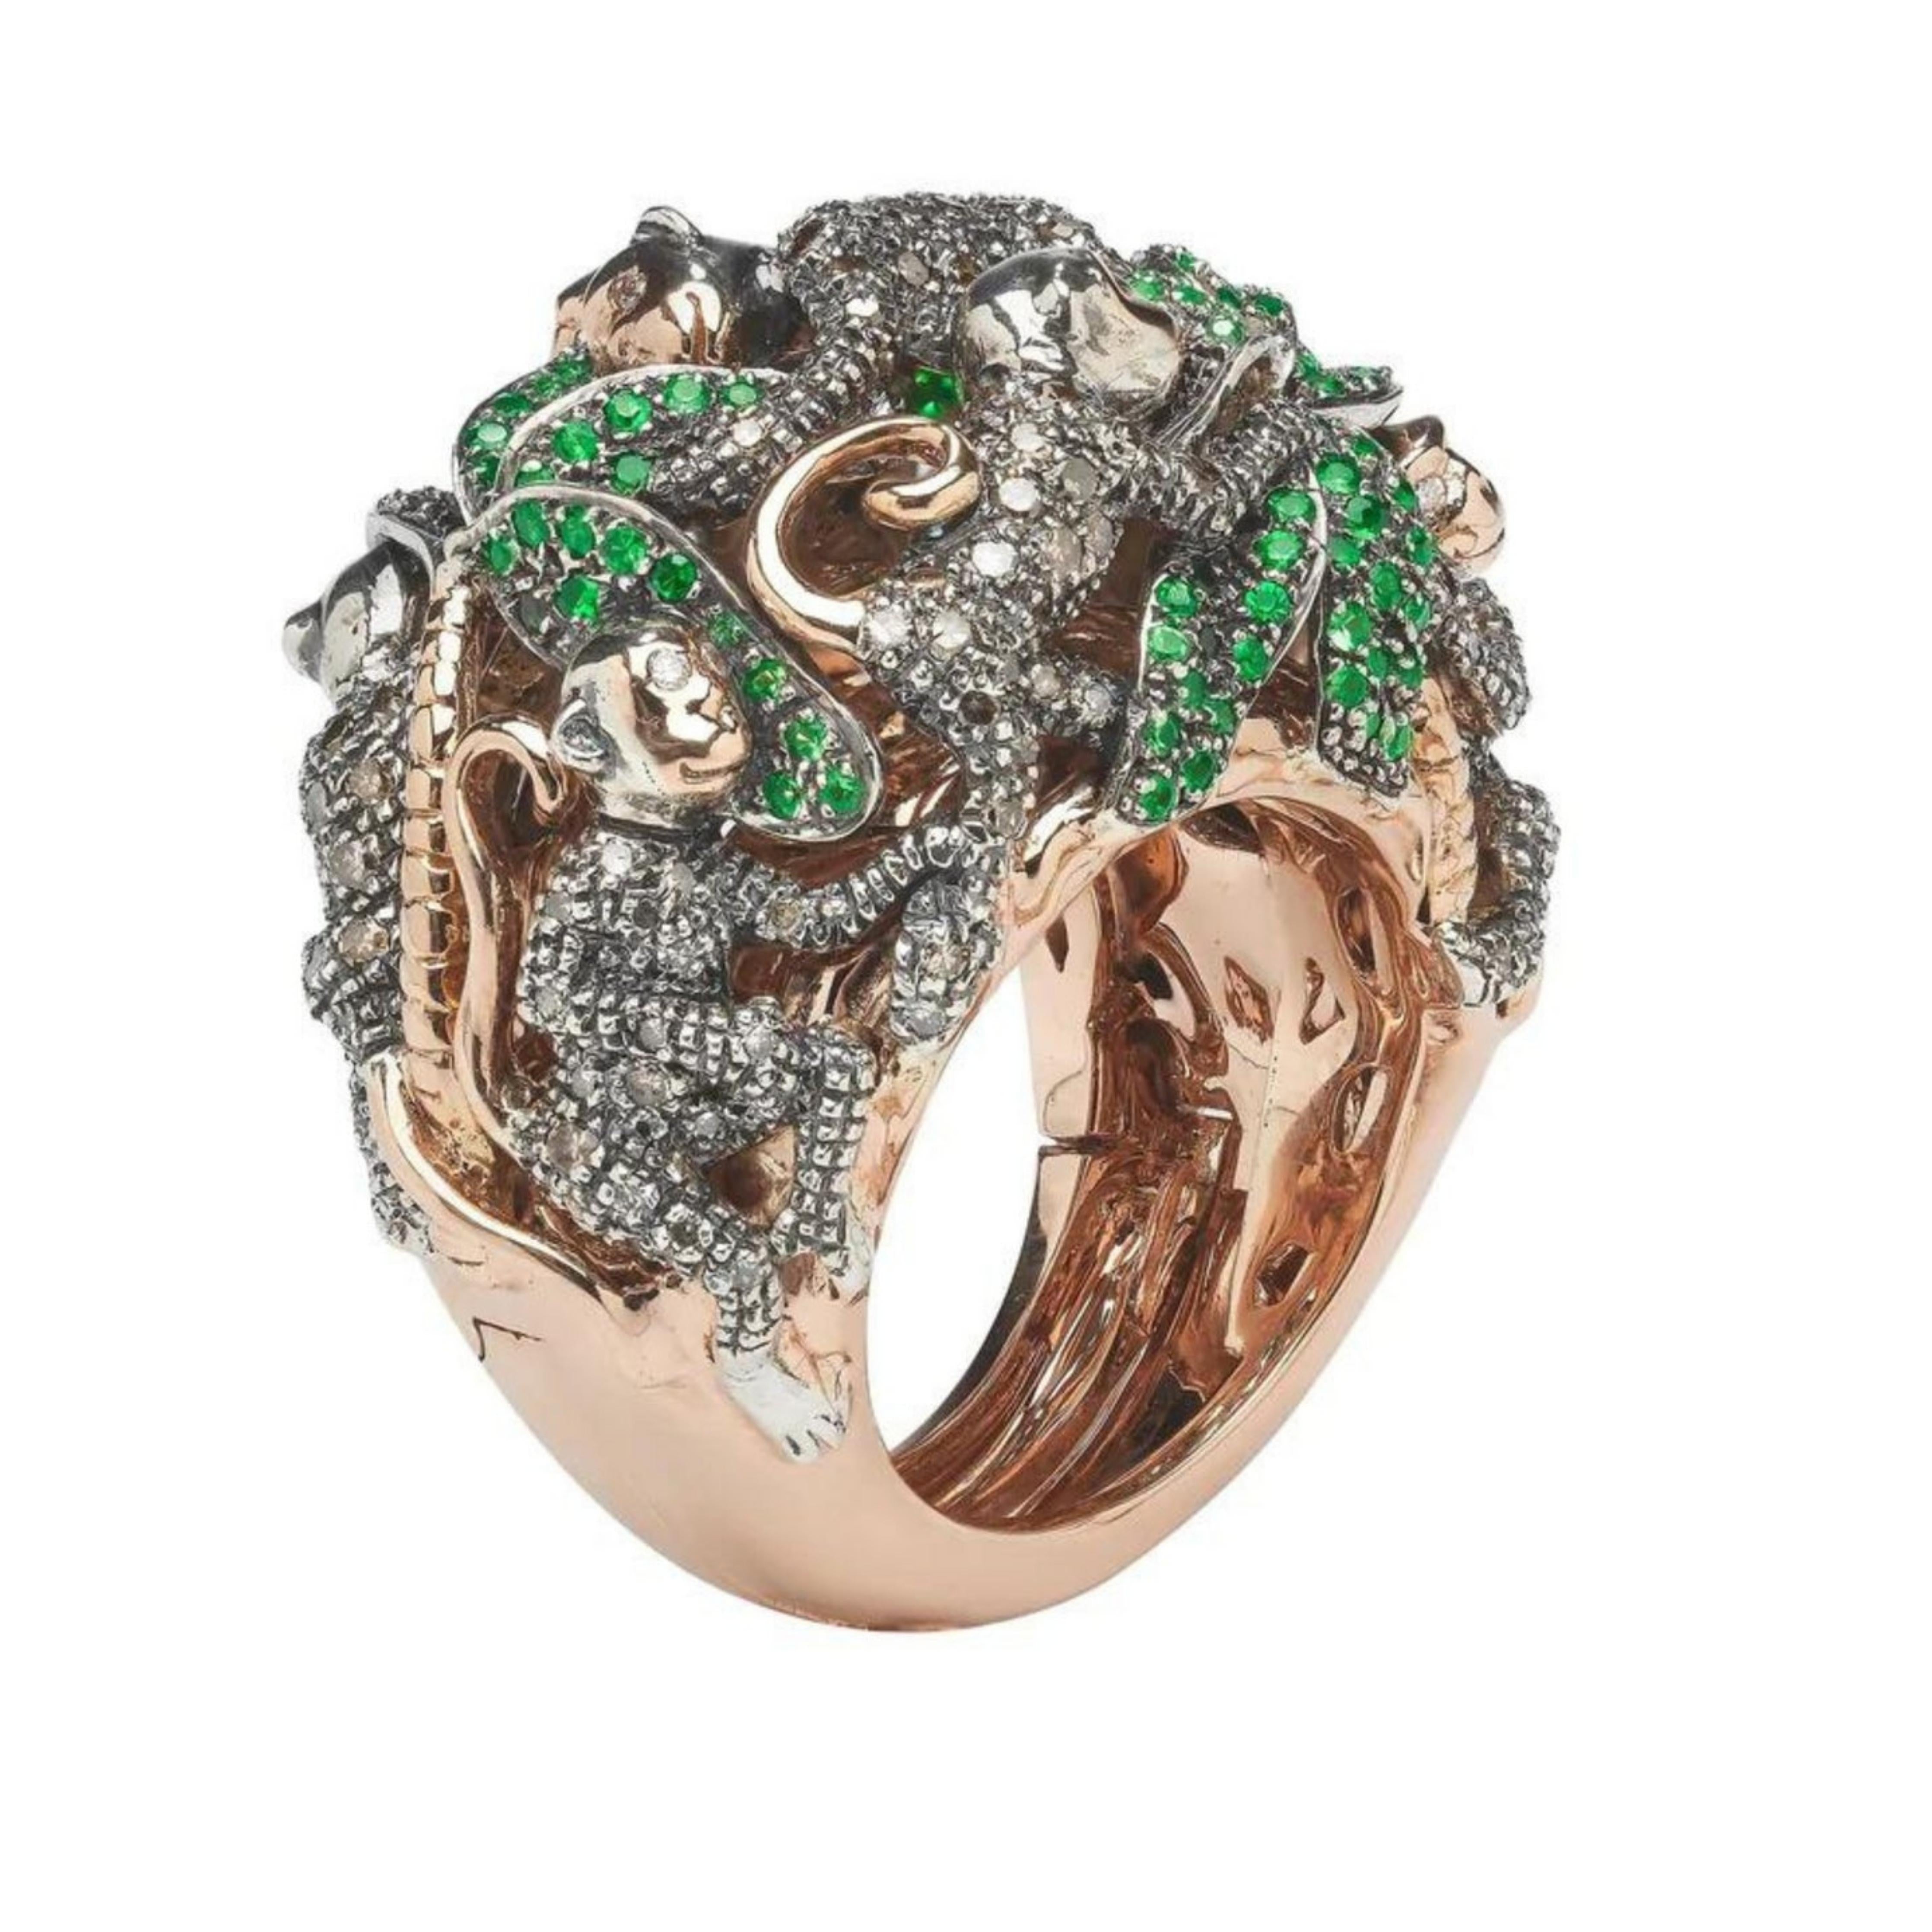 Bibi van der Velden, Monkey Ring in a Ring. A two part ring, crafted from 18K rose and yellow gold and sterling silver, this ornate cocktail ring is artfully embellished with brown diamonds and sparkling green tsavorites. The cocktail ring is topped with a family of jewelled monkeys nestled amongst lush palm trees. A secret compartment opens and reveals the 18K gold banana ring inside. Shown from side.